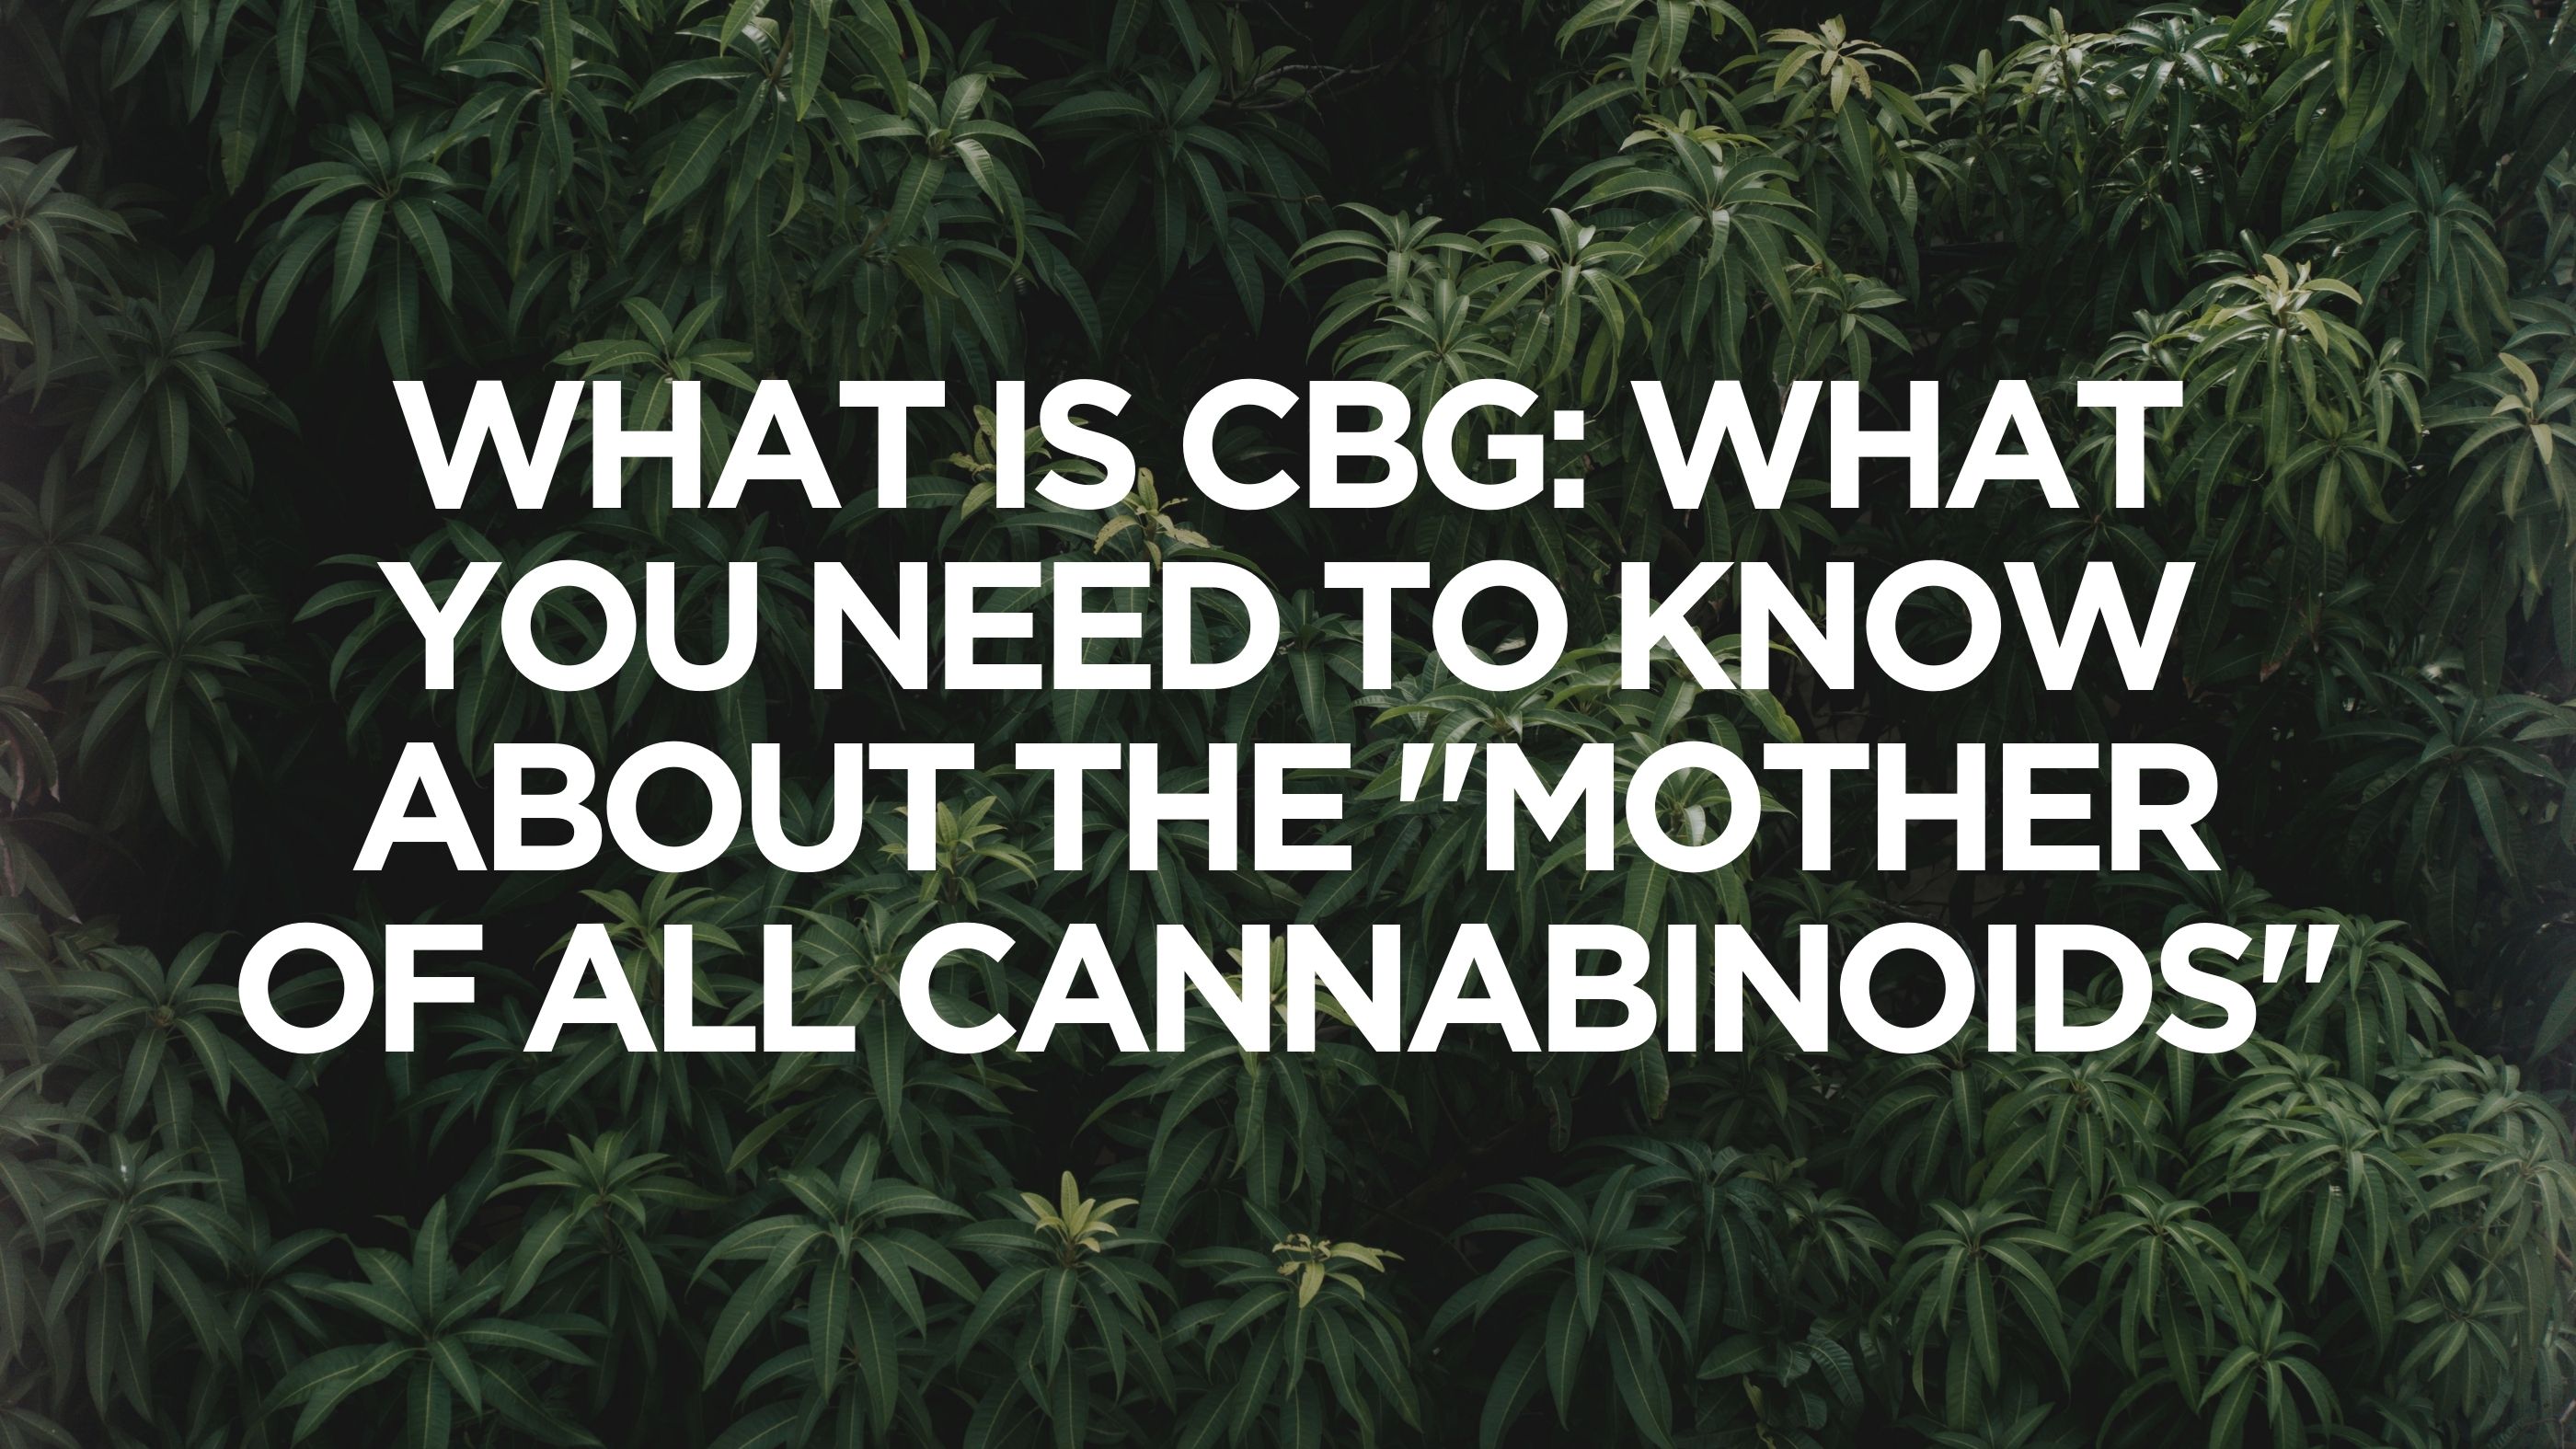 What is CBG: What You Need to Know About the "Mother of All Cannabinoids"